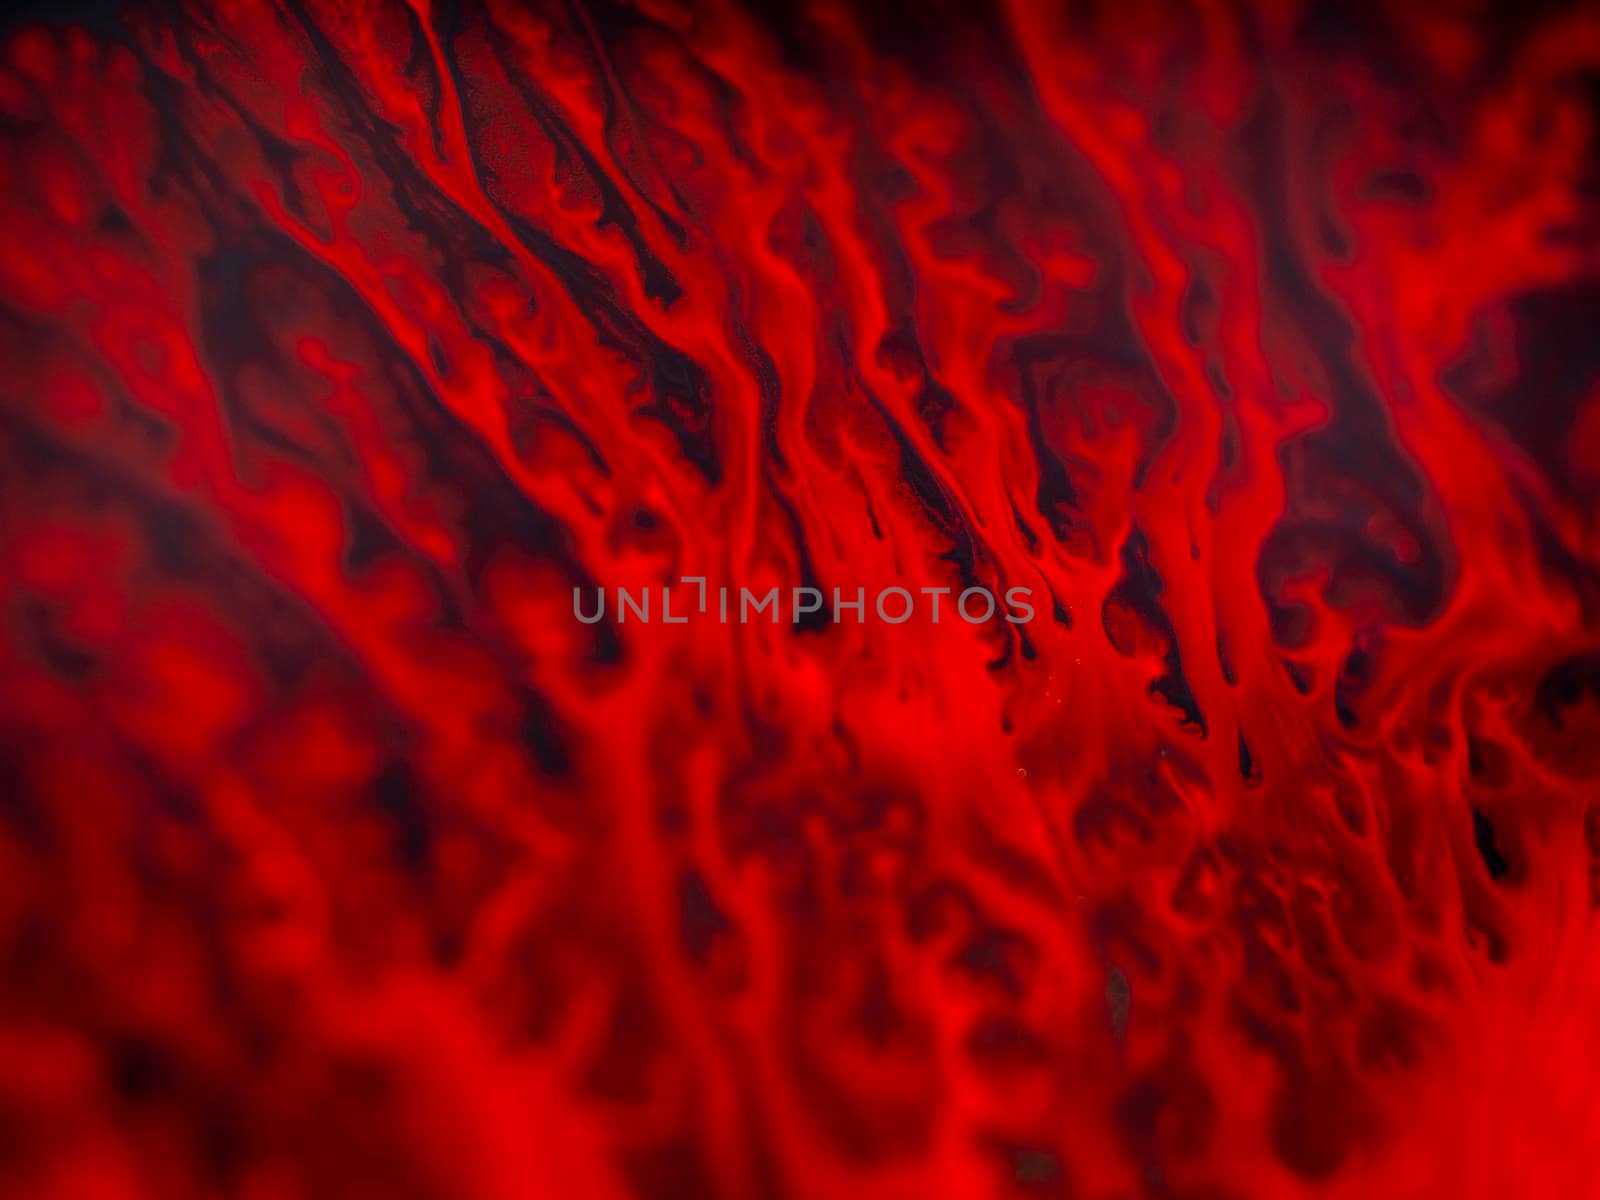 Unique germination of red threads of paint from a spot on a black dark background. Abstract textural art. Liquid forms of design. Unique image, picture, photo, background.